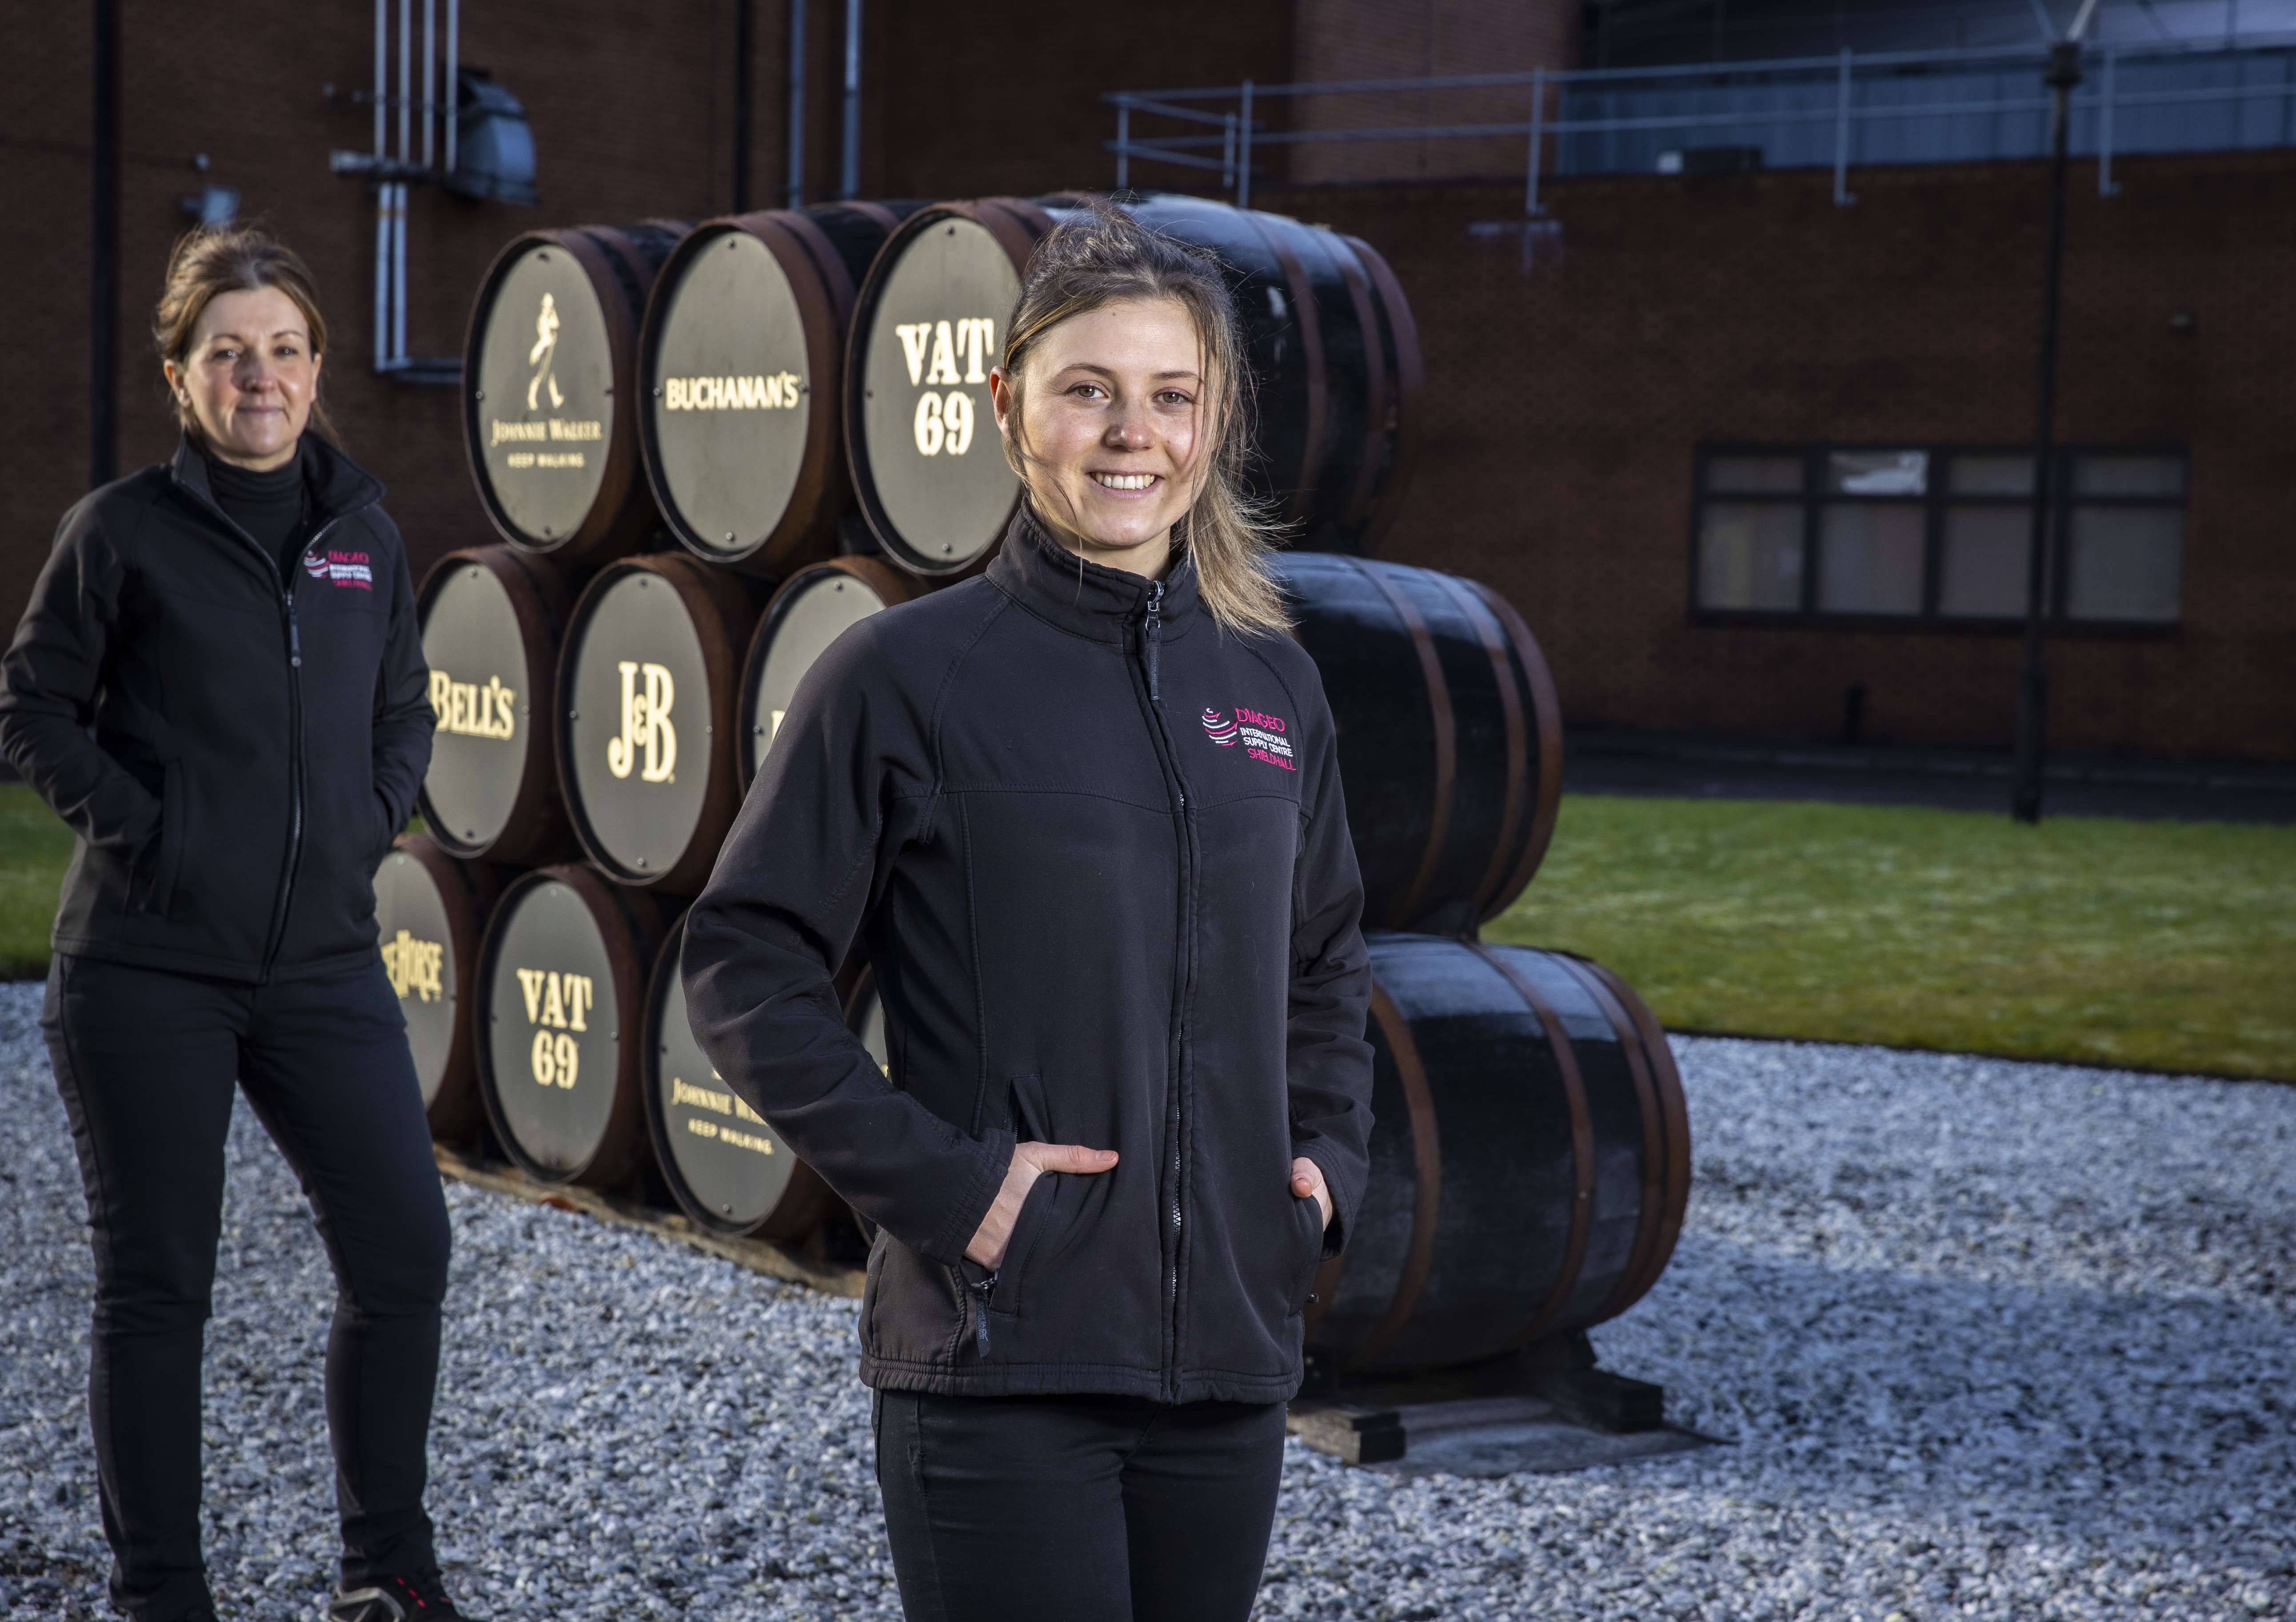 A woman standing in front of her supervisor with whisky barrels in the background.